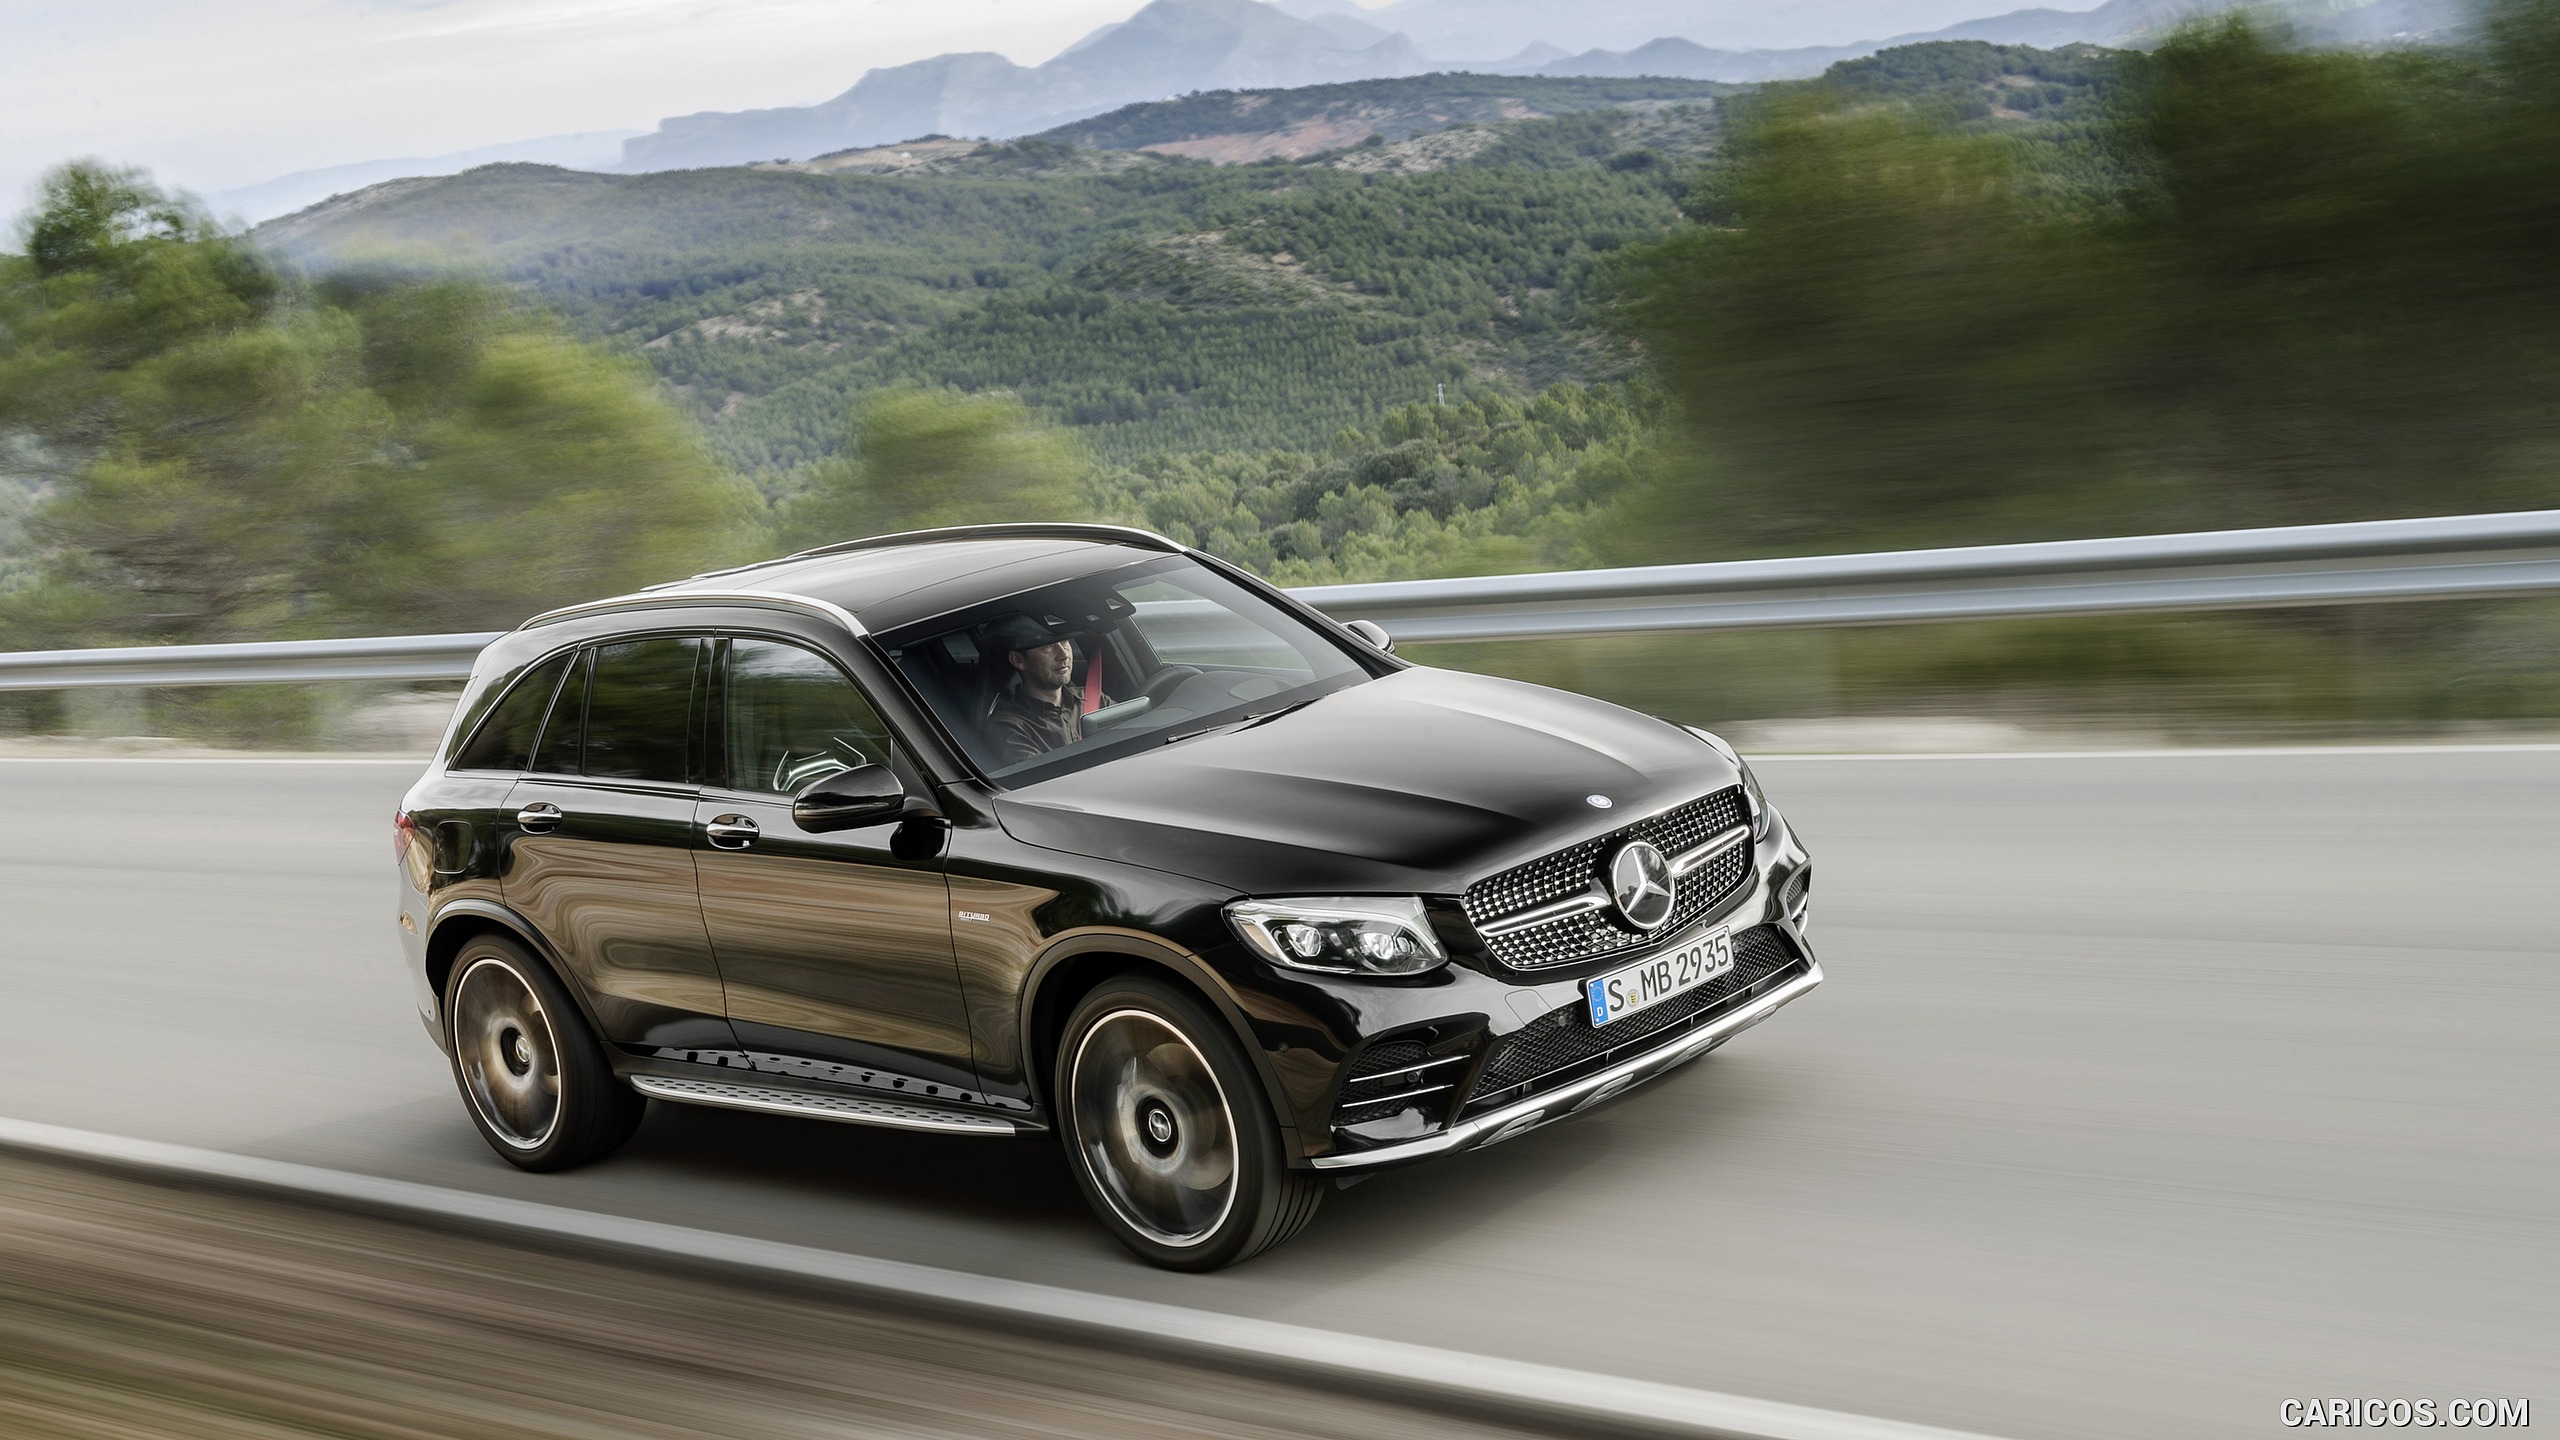 2017 Mercedes-AMG GLC 43 4MATIC (Chassis: X253, Color: Obsidian Black) - Front, #11 of 108